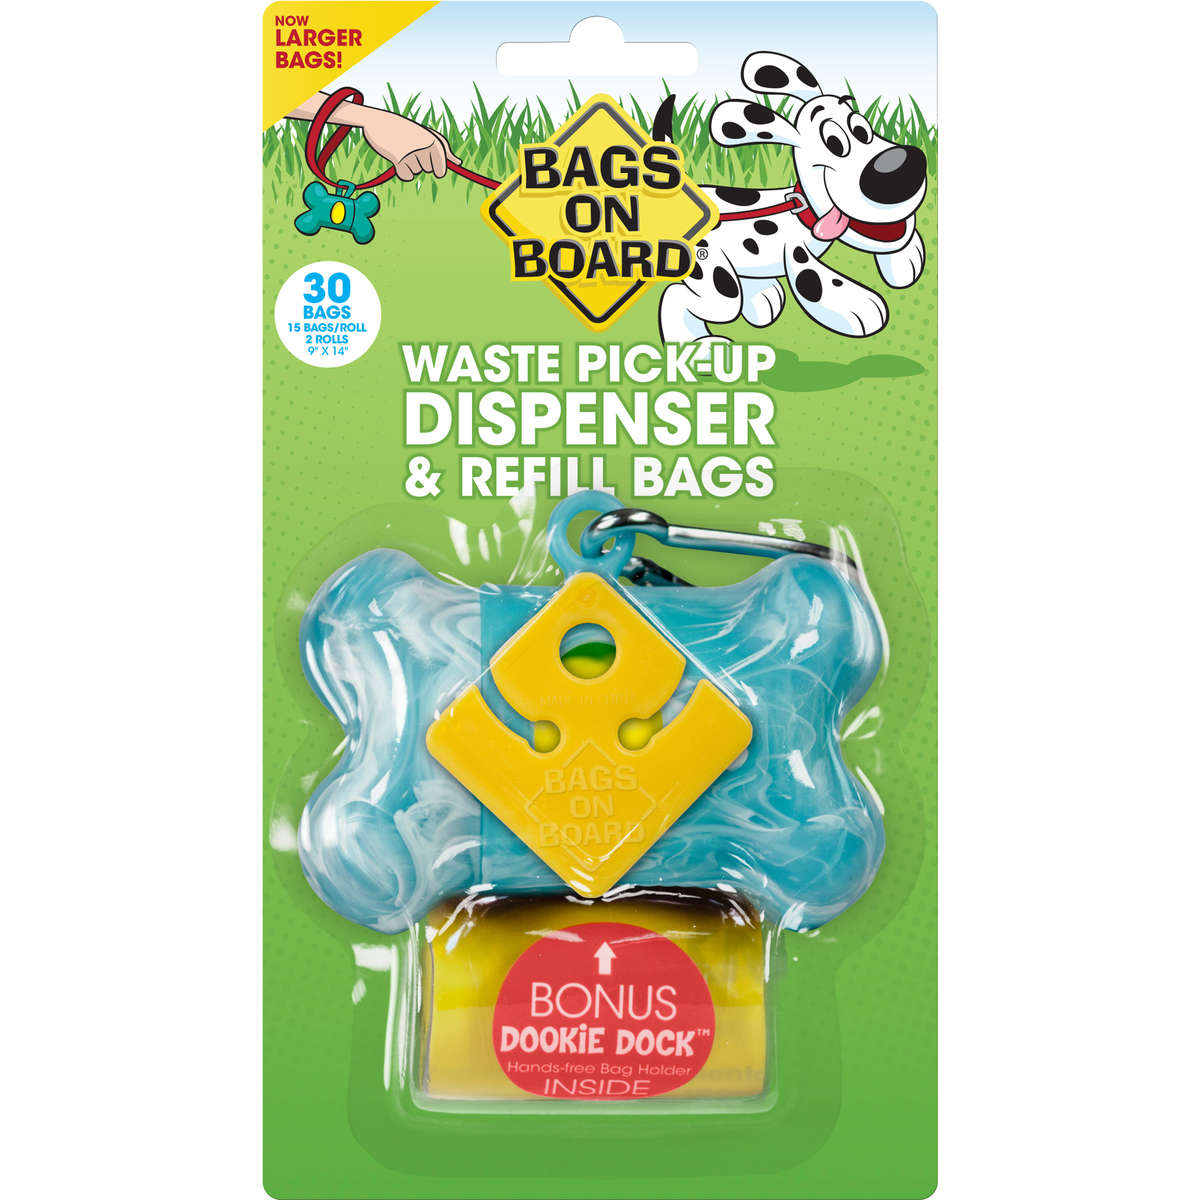 Waste Pick-Up Dispenser and Refill Bags with Dookie Dock 30 bags